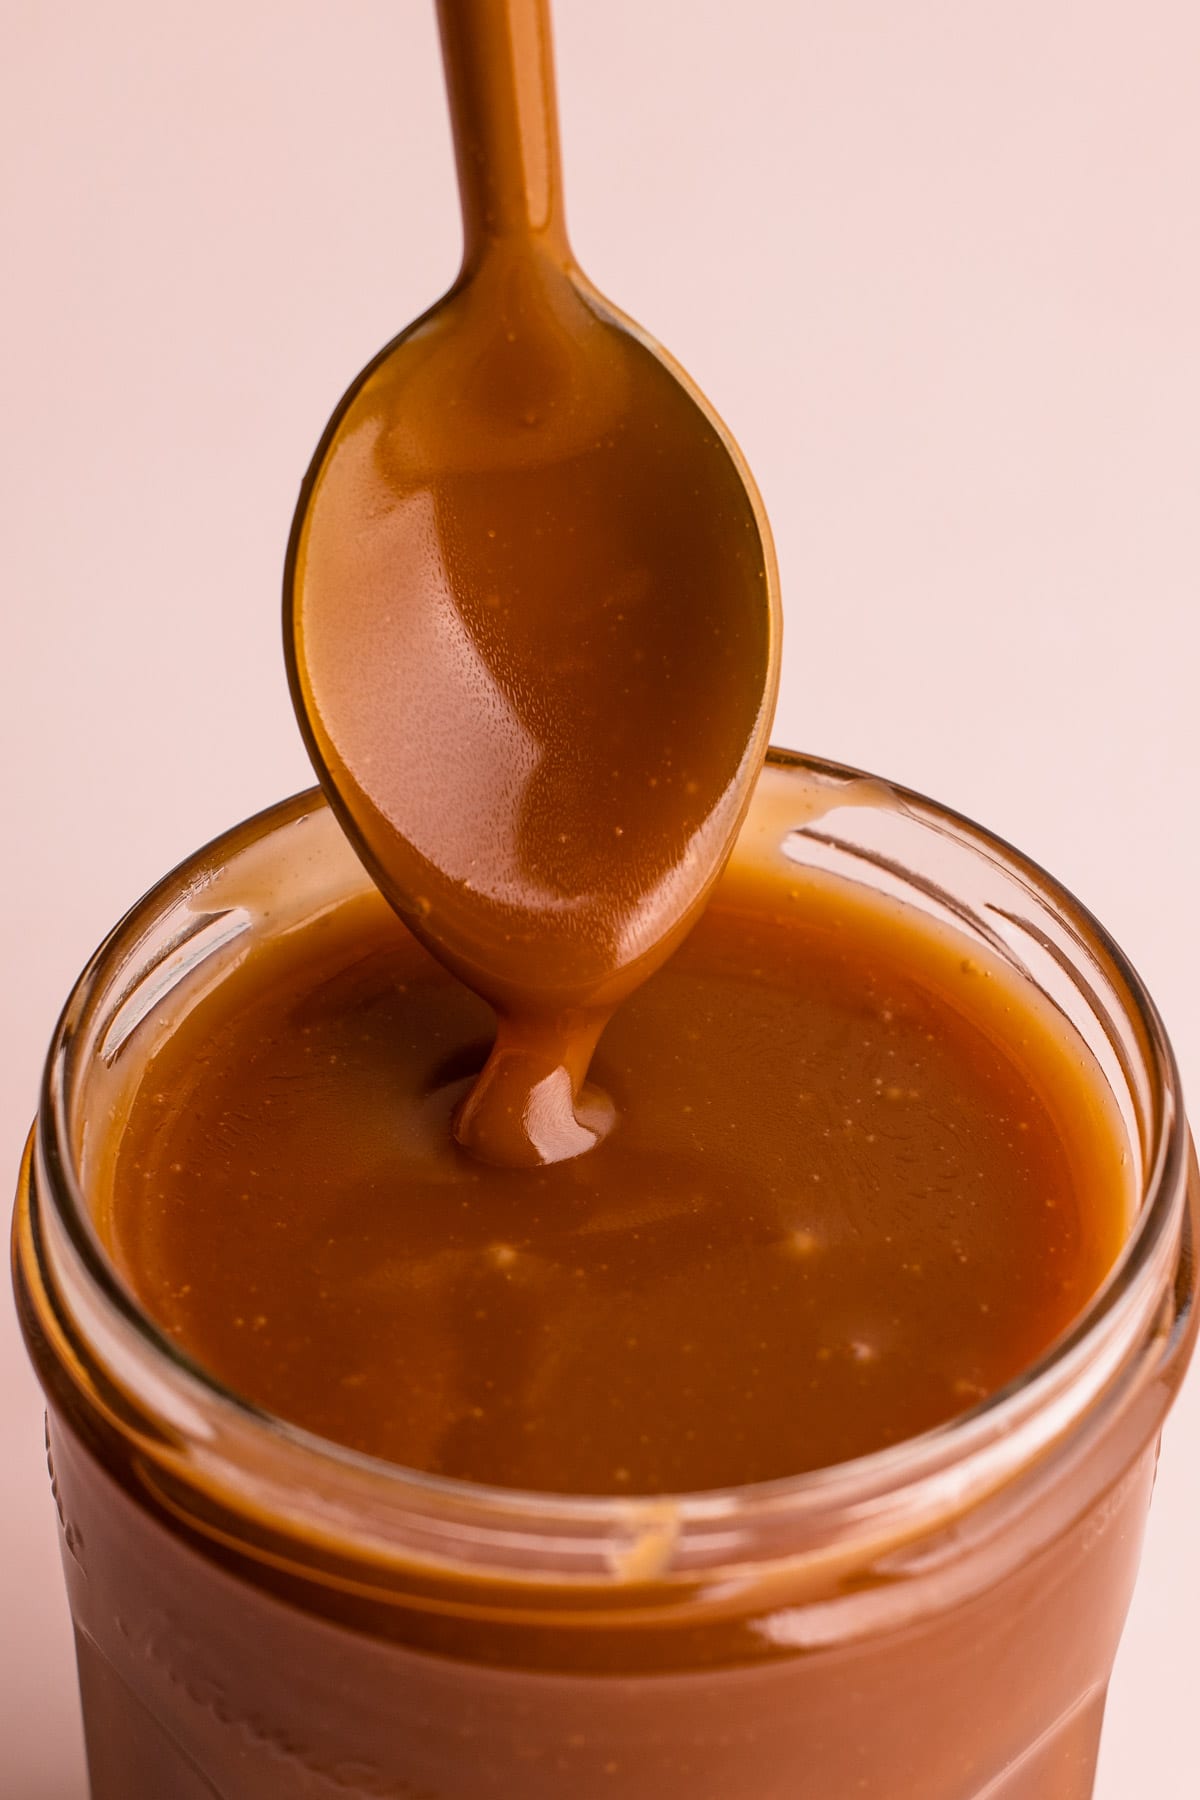 Caramel dripping off of a spoon.